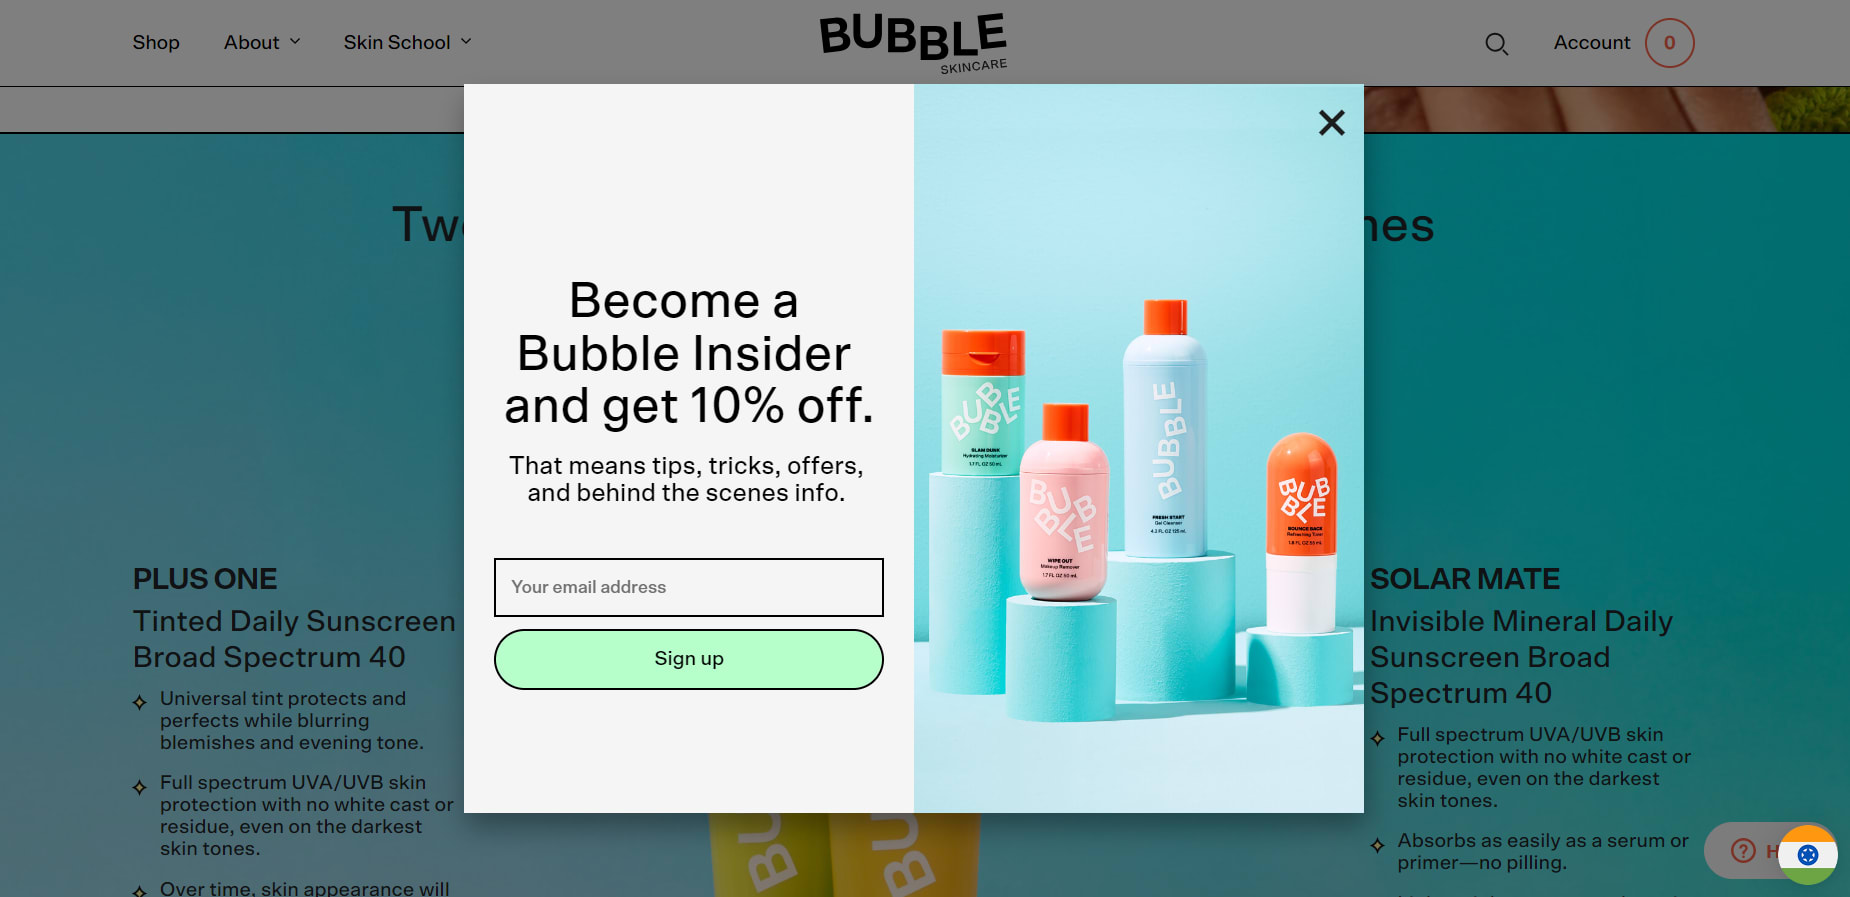 An example of a limited time offer on Bubble Skincare’s website.